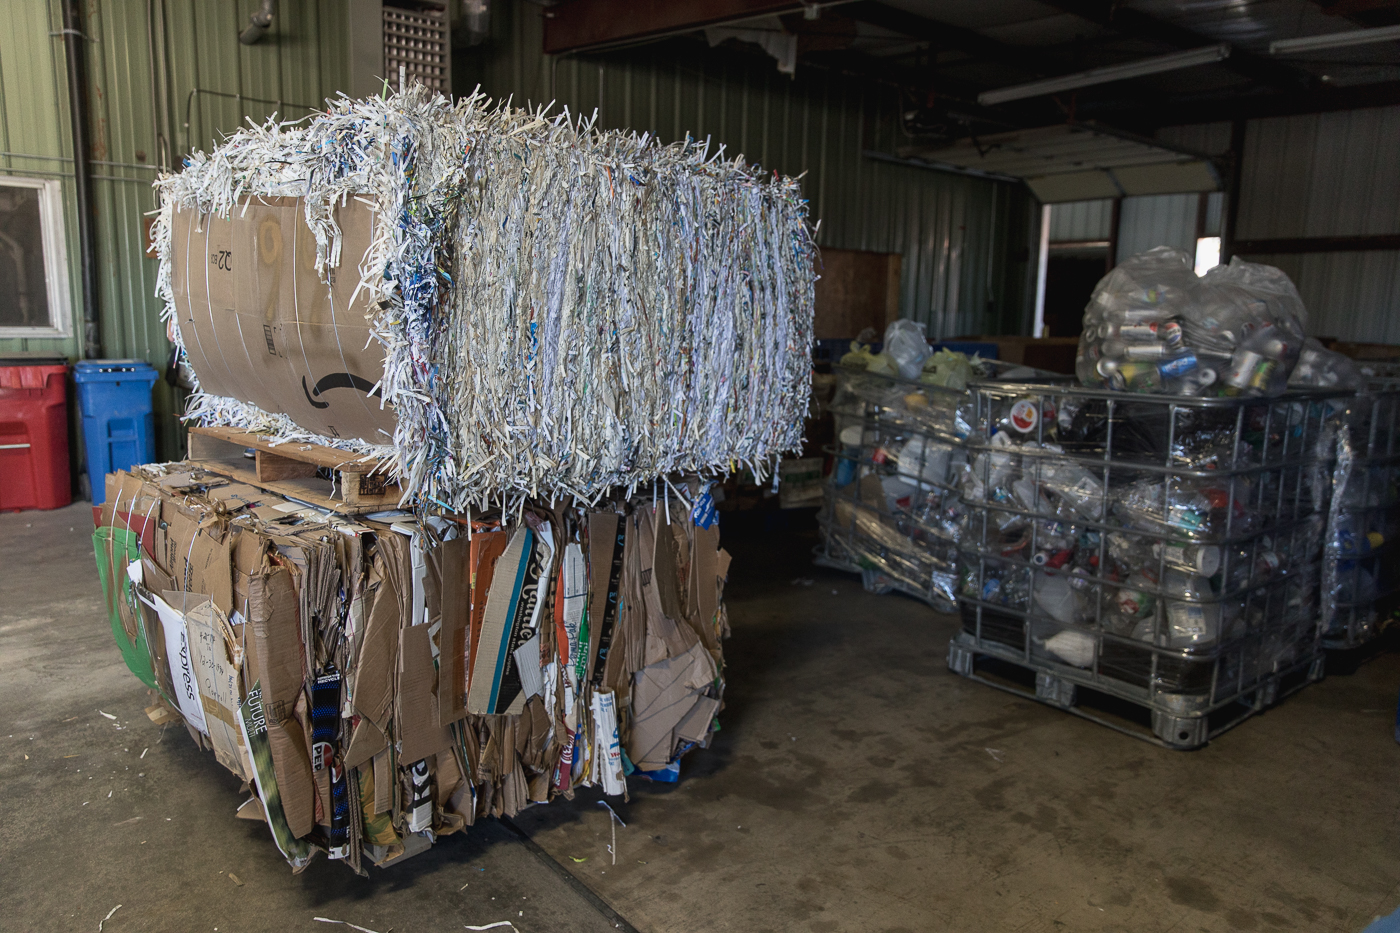 TVDSI provides recycling and shredding services for Marshall County Recycling. Adults in our day center work to process and sort the recycling and shredding we receive from area businesses and individuals.